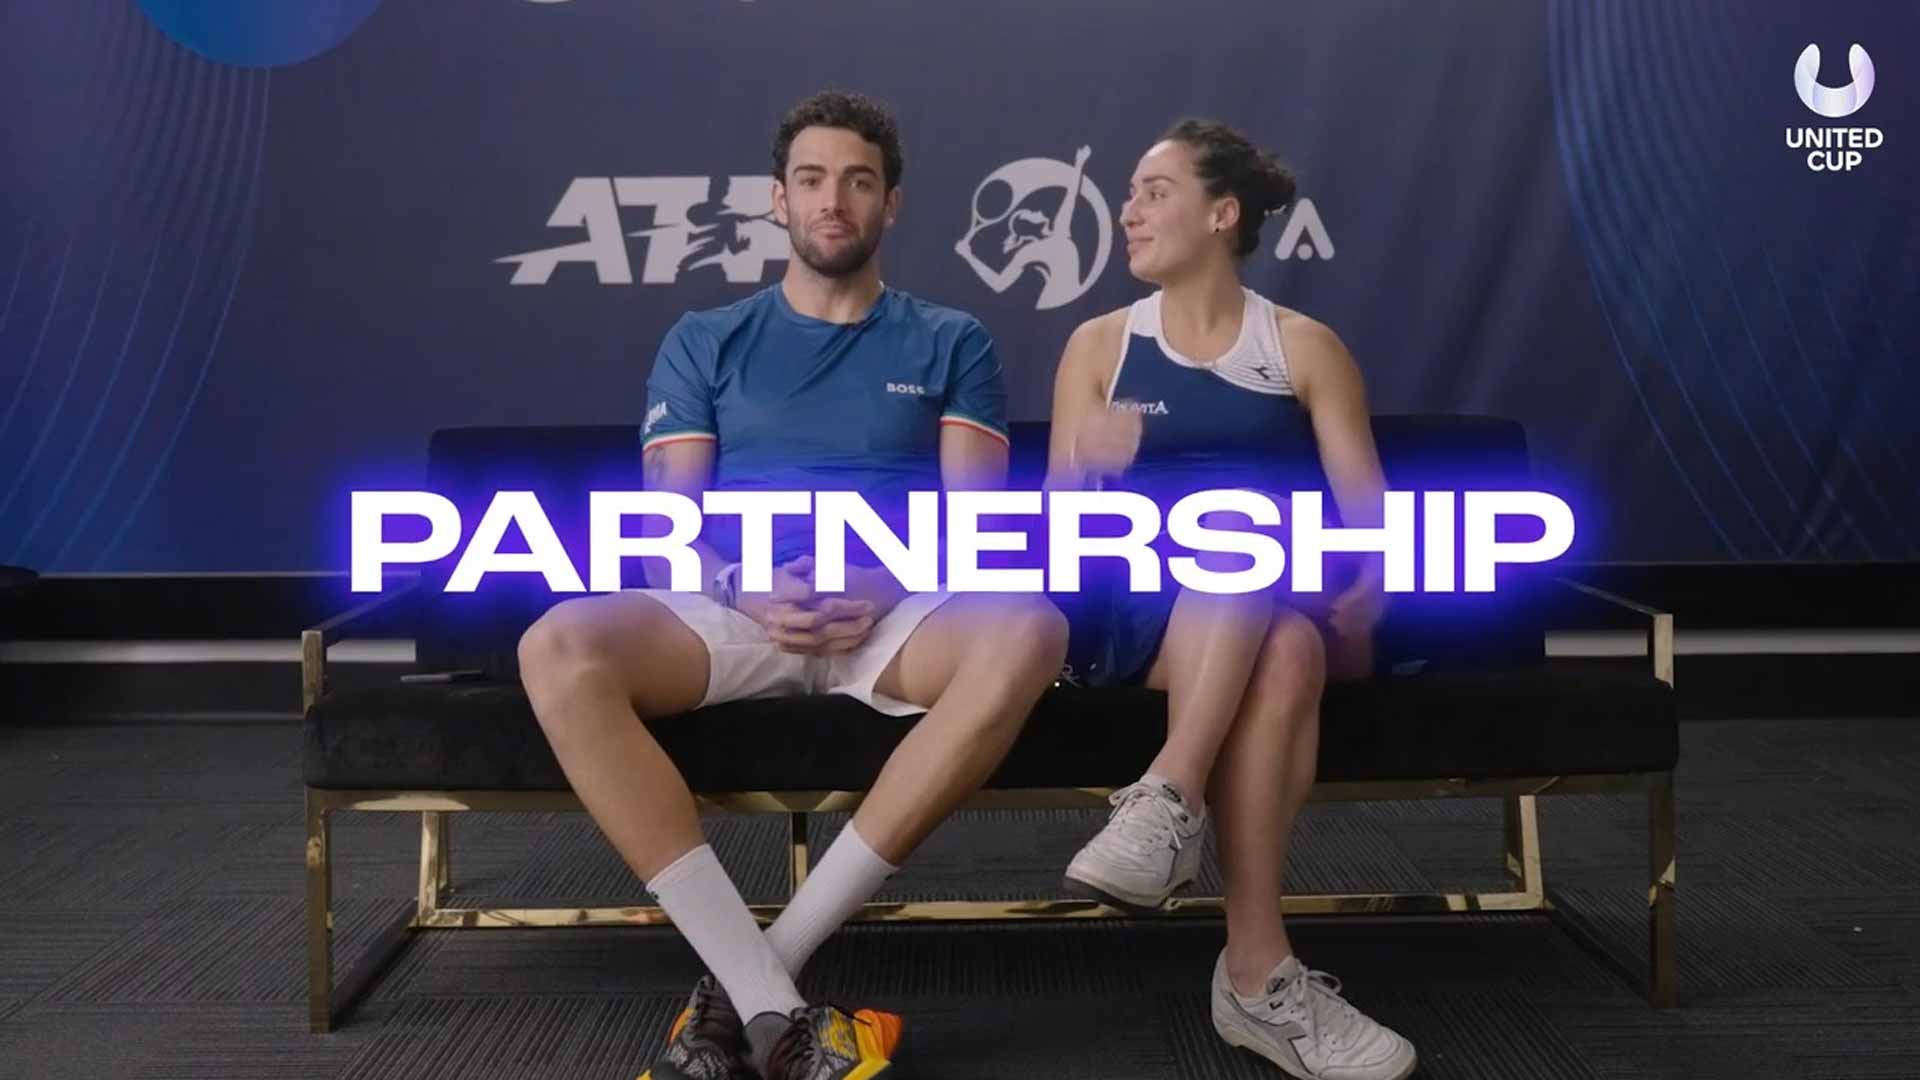 Matteo Berrettini and Martina Trevisan during the 2023 United Cup Partnership feature.